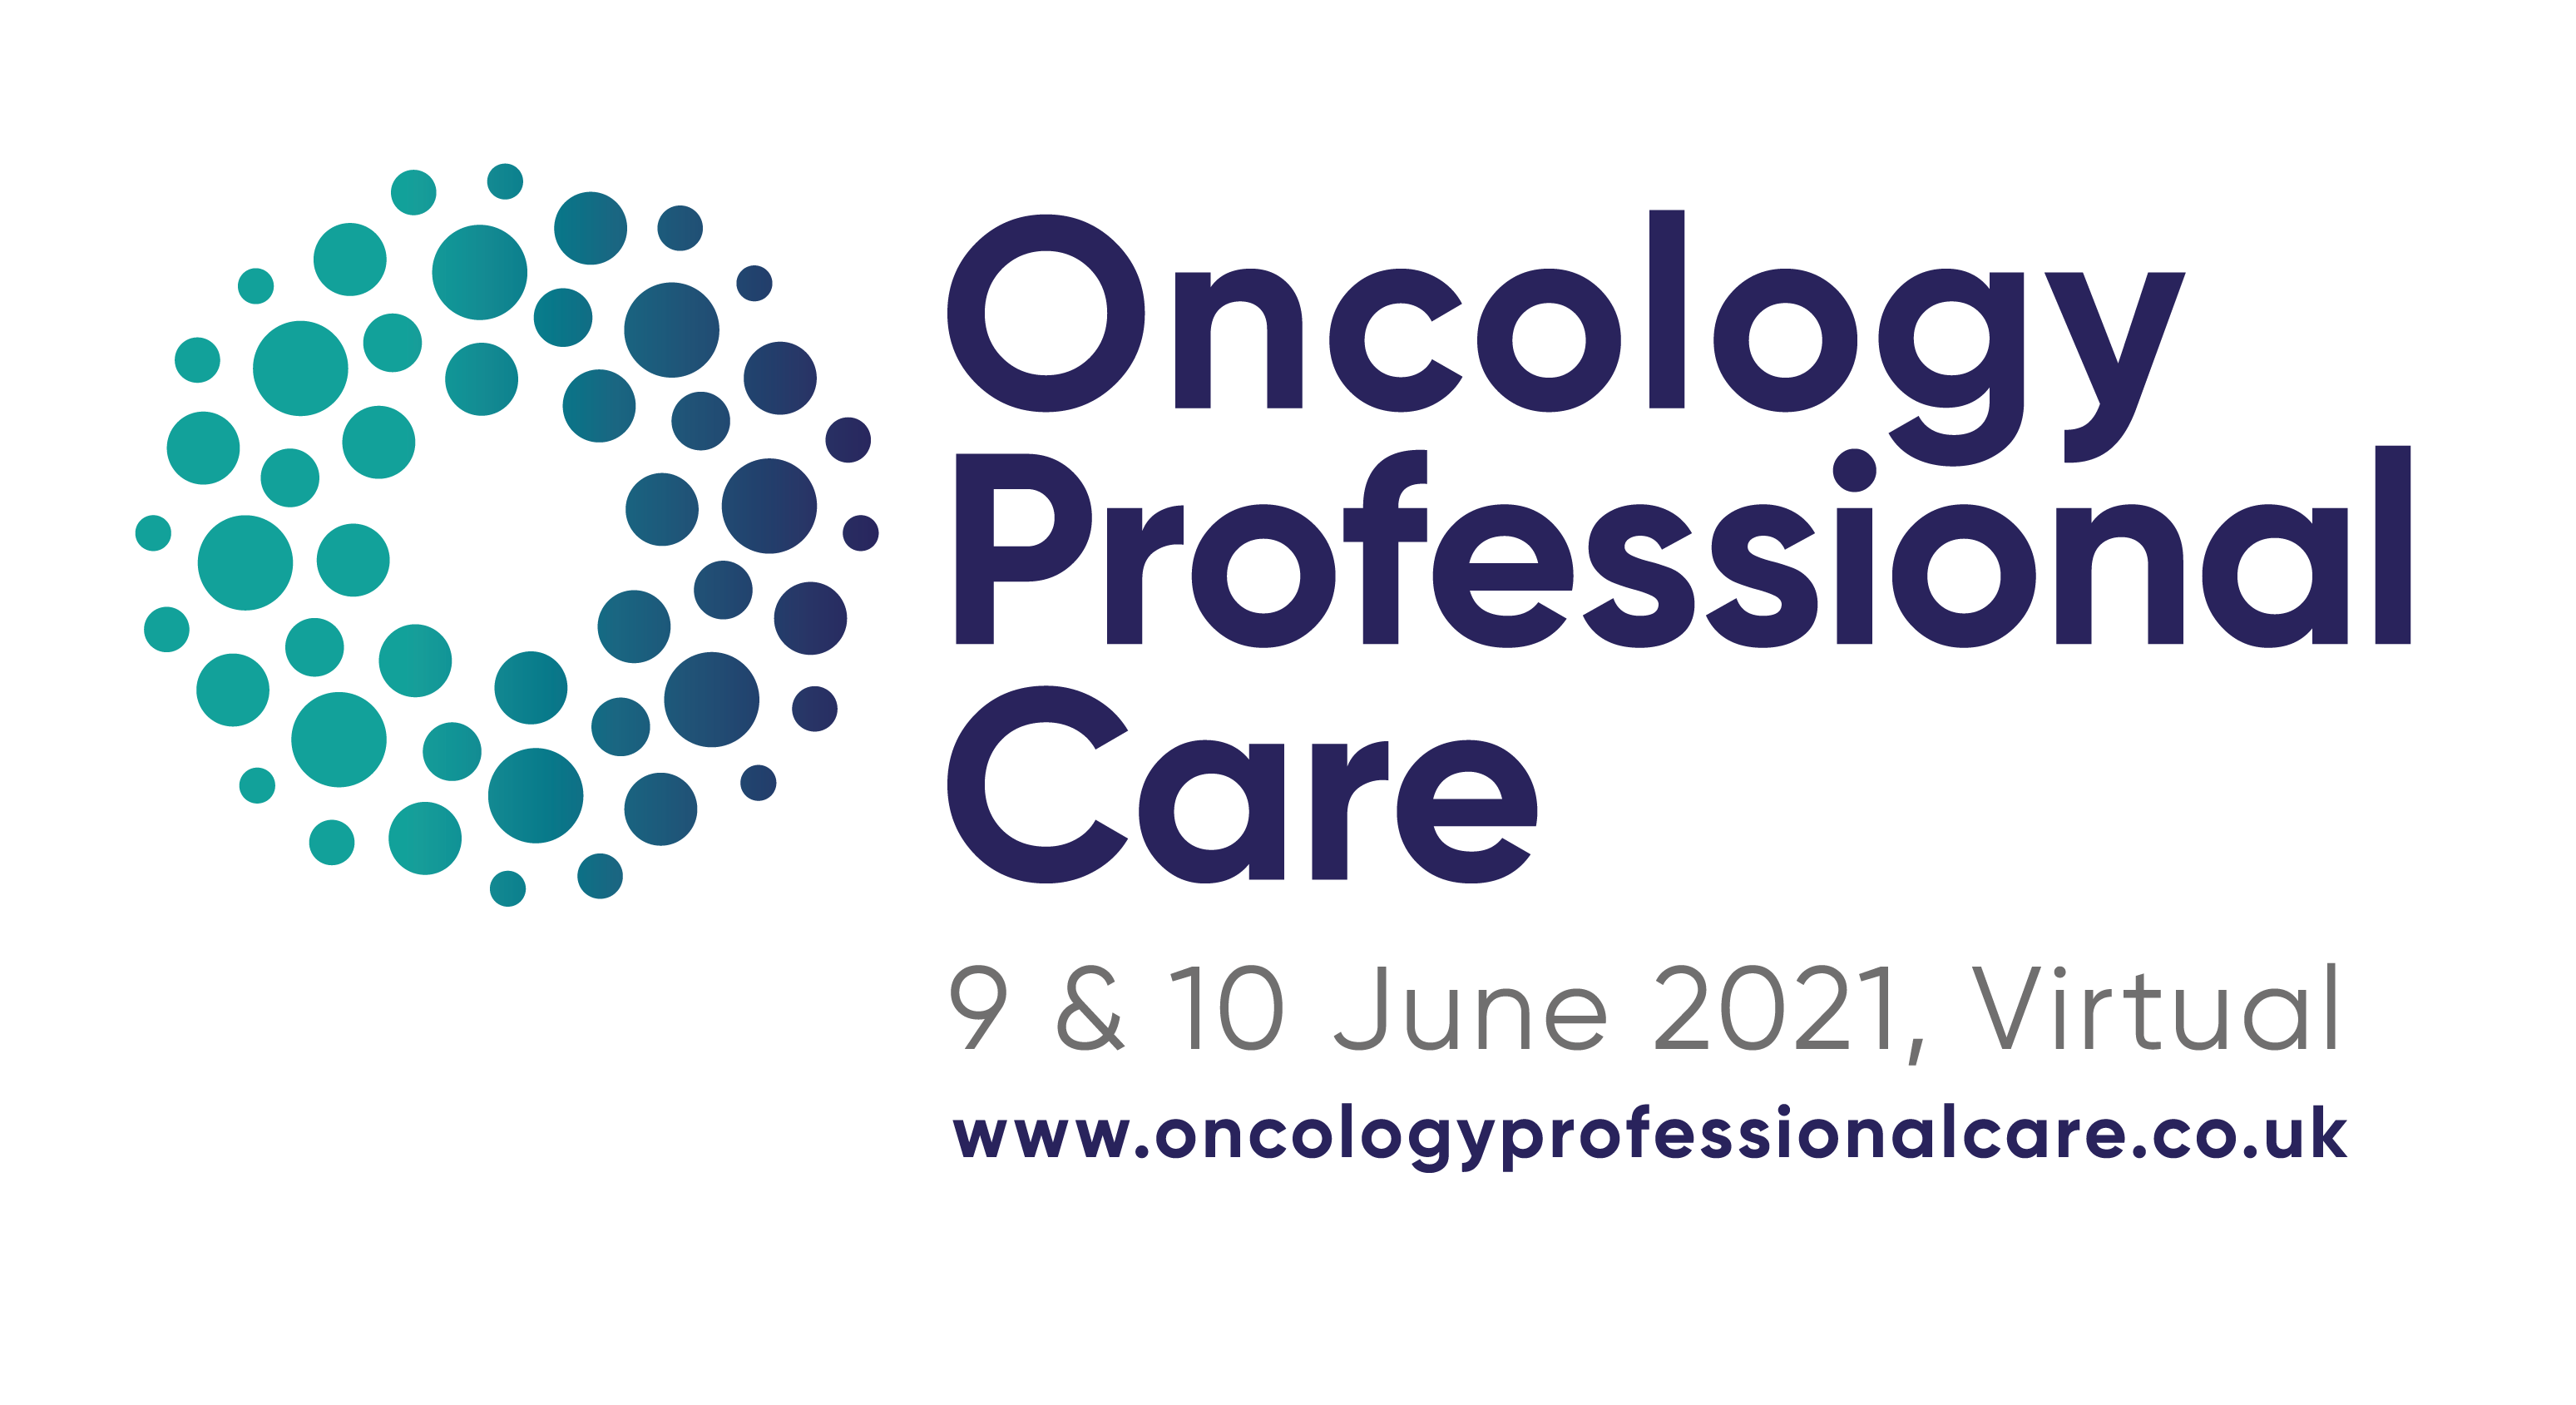 The UK's new and dynamic virtual event for the Oncology community